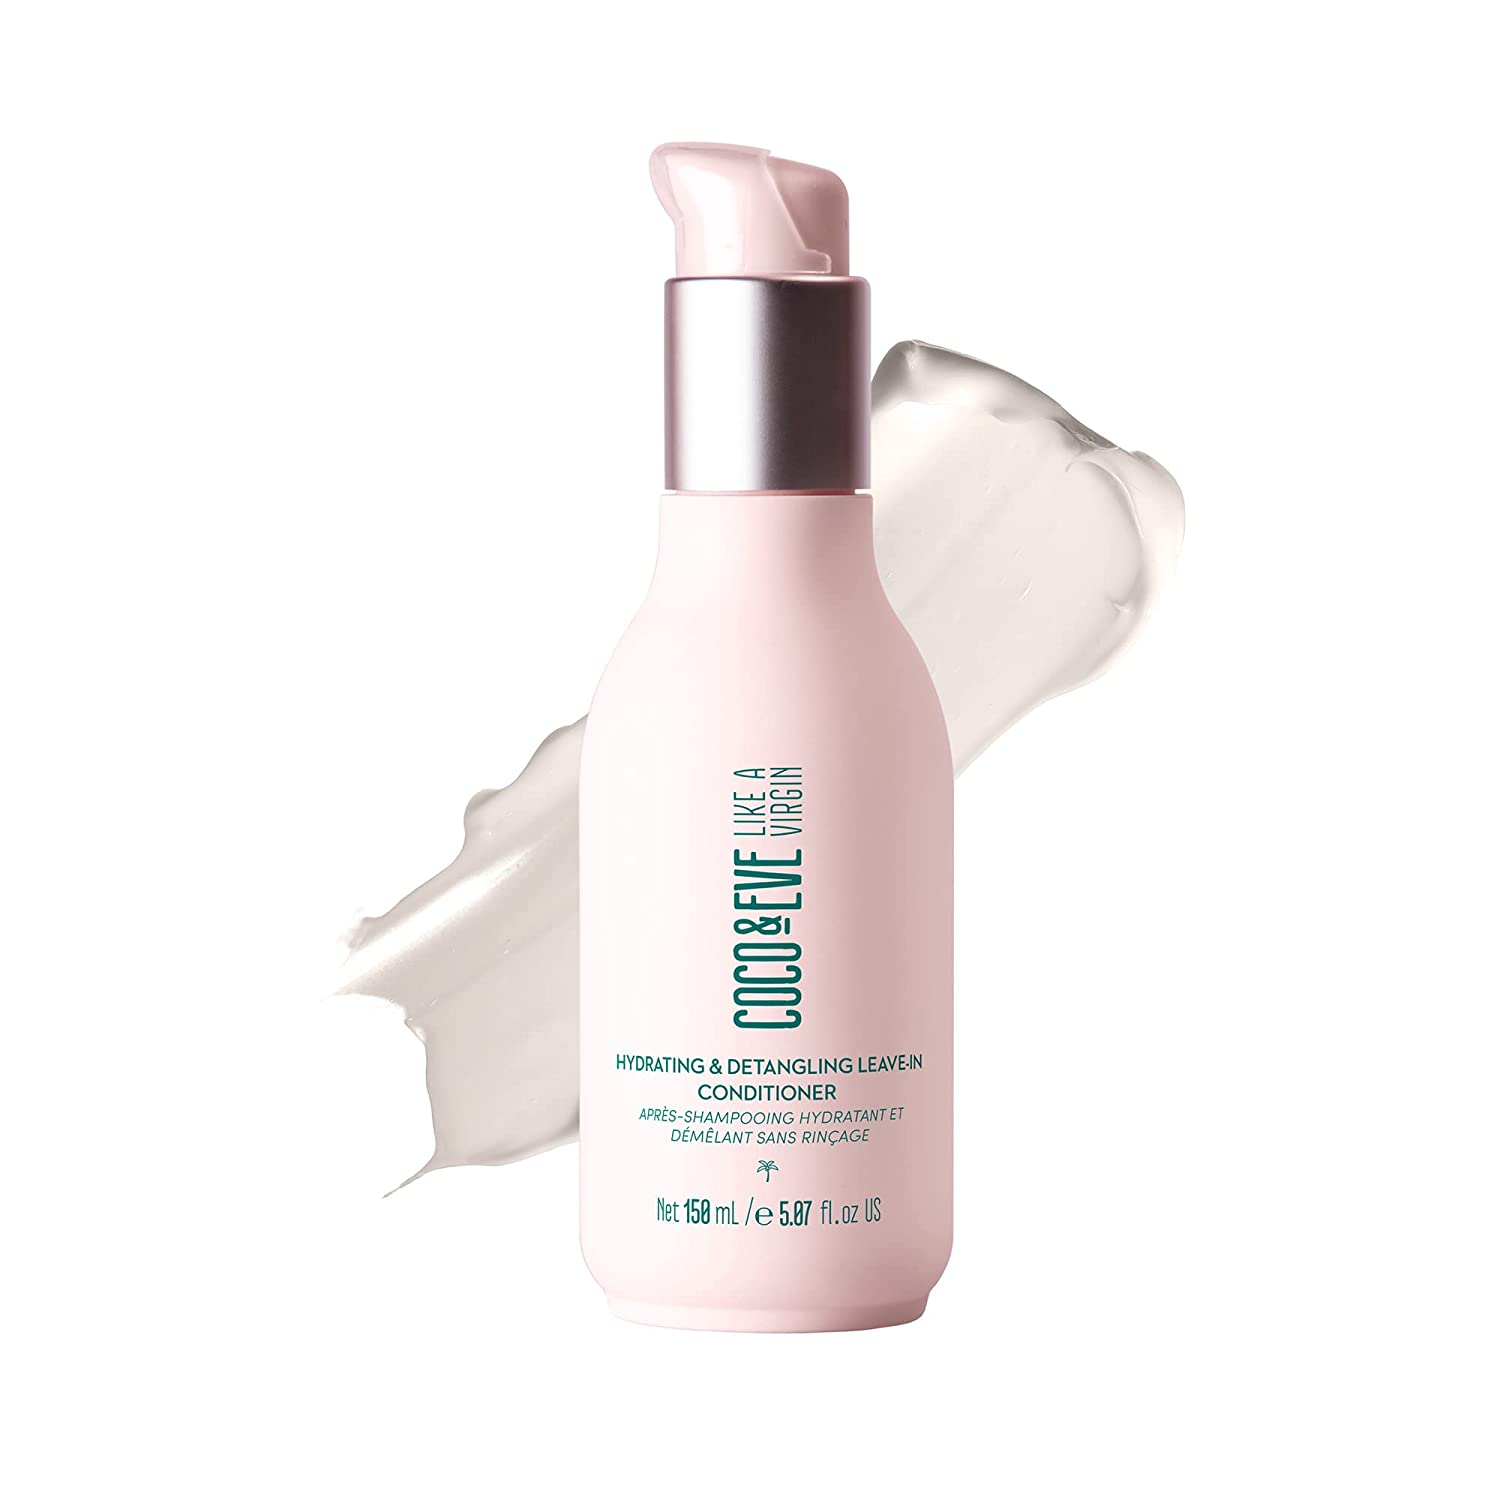 Coco & Eve Like a Virgin Leave-In Conditioner (150ml)